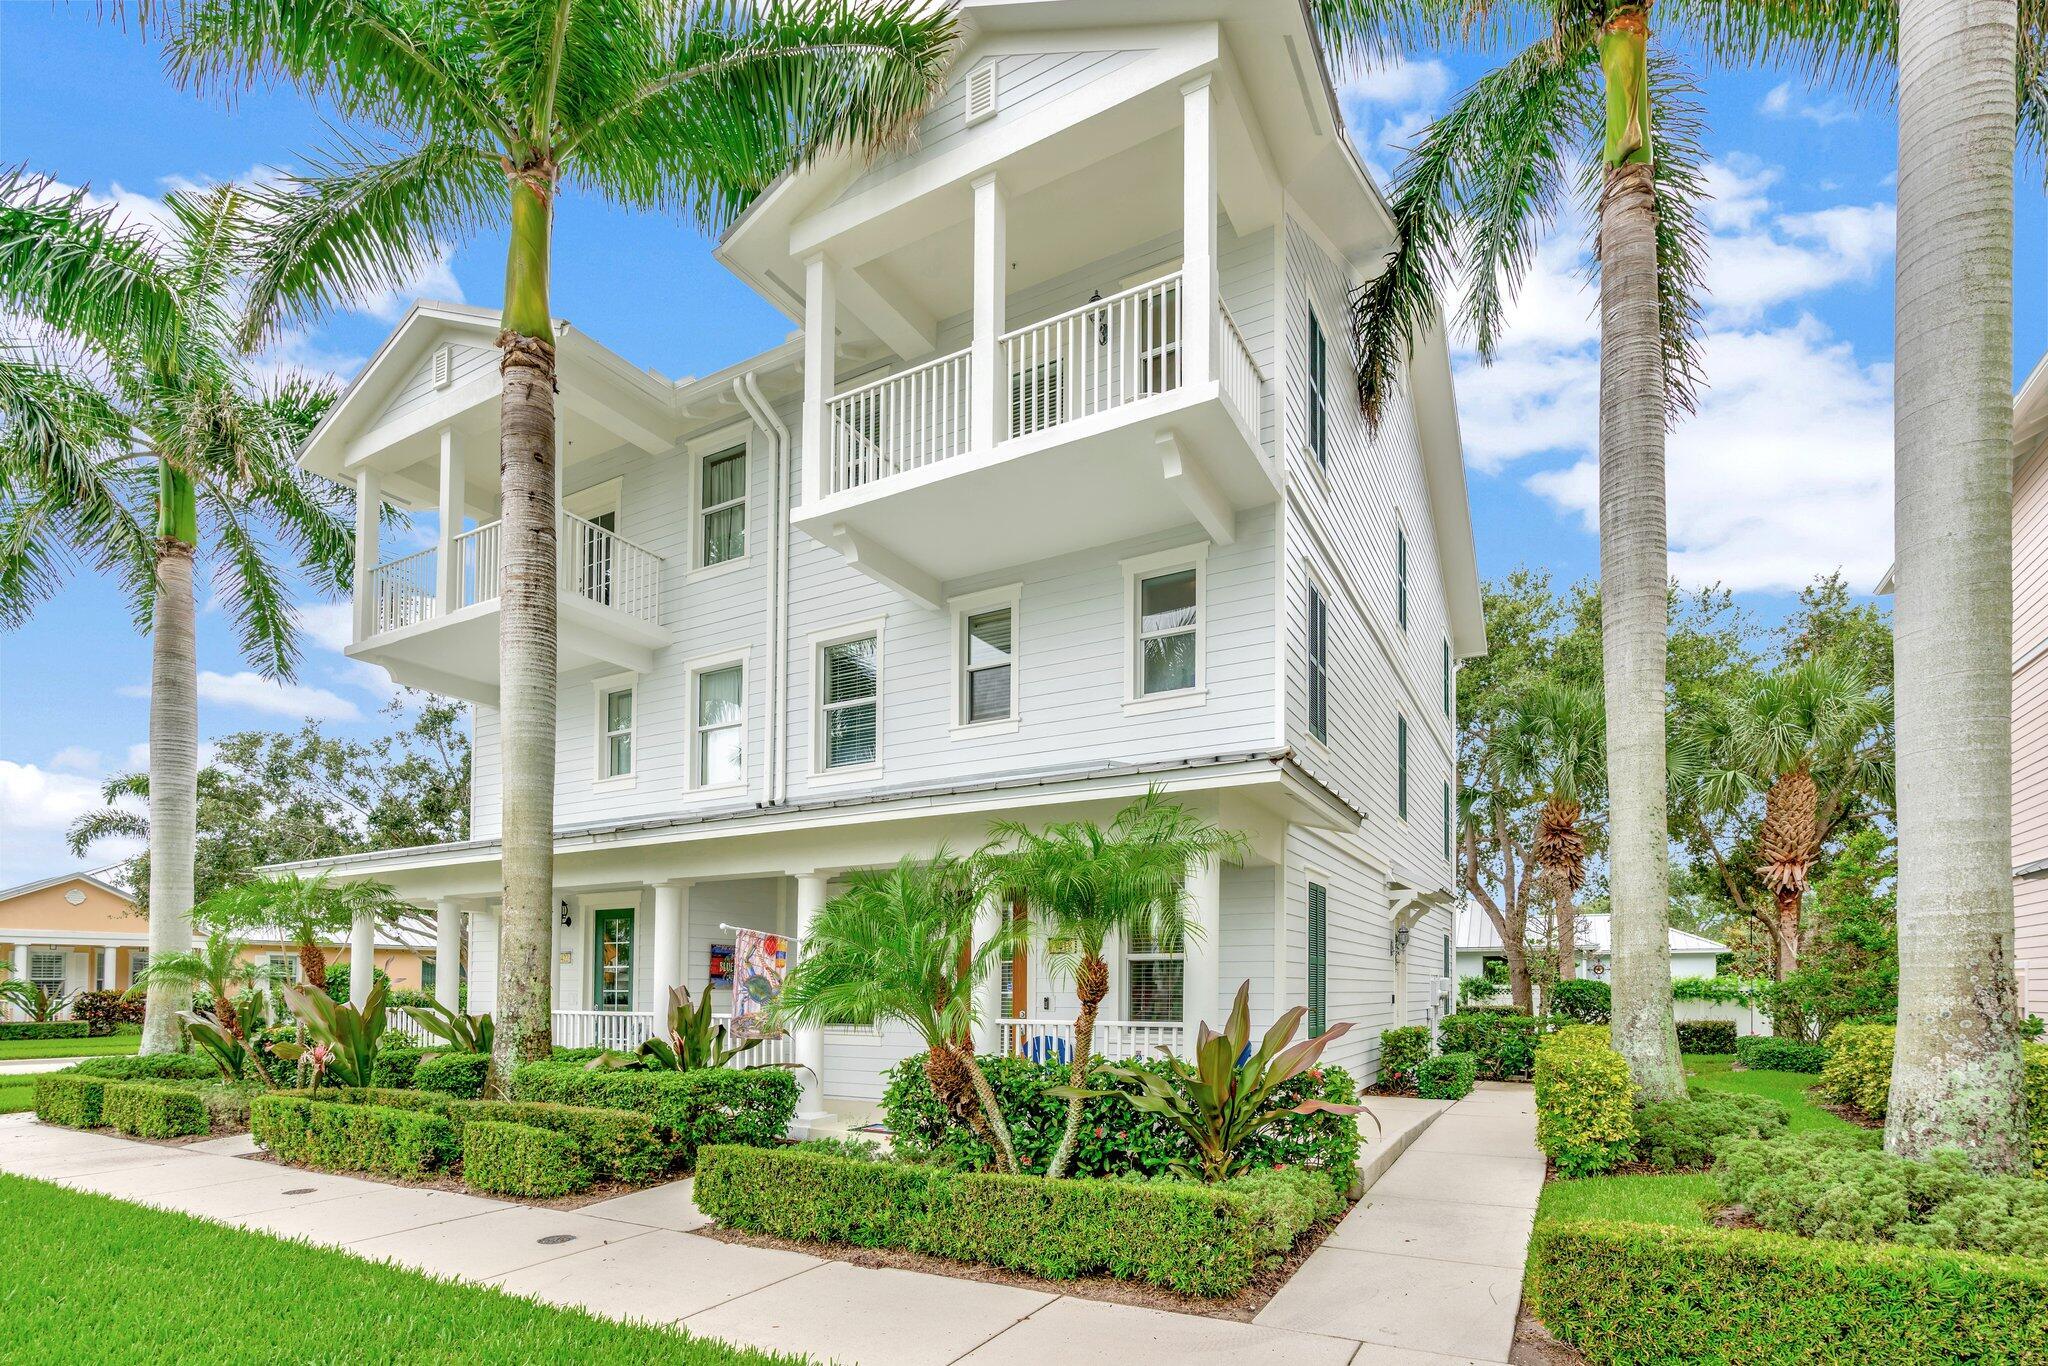 Experience the perfect blend of work and life in this stunning live/work multi-zoned townhouse located in the highly desired Abacoa neighborhood. This Key West style townhouse in Mallory Creek offers flexibility with a ground floor perfect for your business or as an additional living space. Enjoy lake views from this 3-story gem featuring 2 master bedrooms with full baths on the third floor. The neighborhood amenities are steps away, including an updated fitness center, rec room, and two heated pools. Store your car and golf cart in the two car garage and enjoy the Abacoa community featuring golf clubs, the Roger Dean baseball stadium, Downtown Abacao, hotels, beautiful parks with recreation, and so much more.